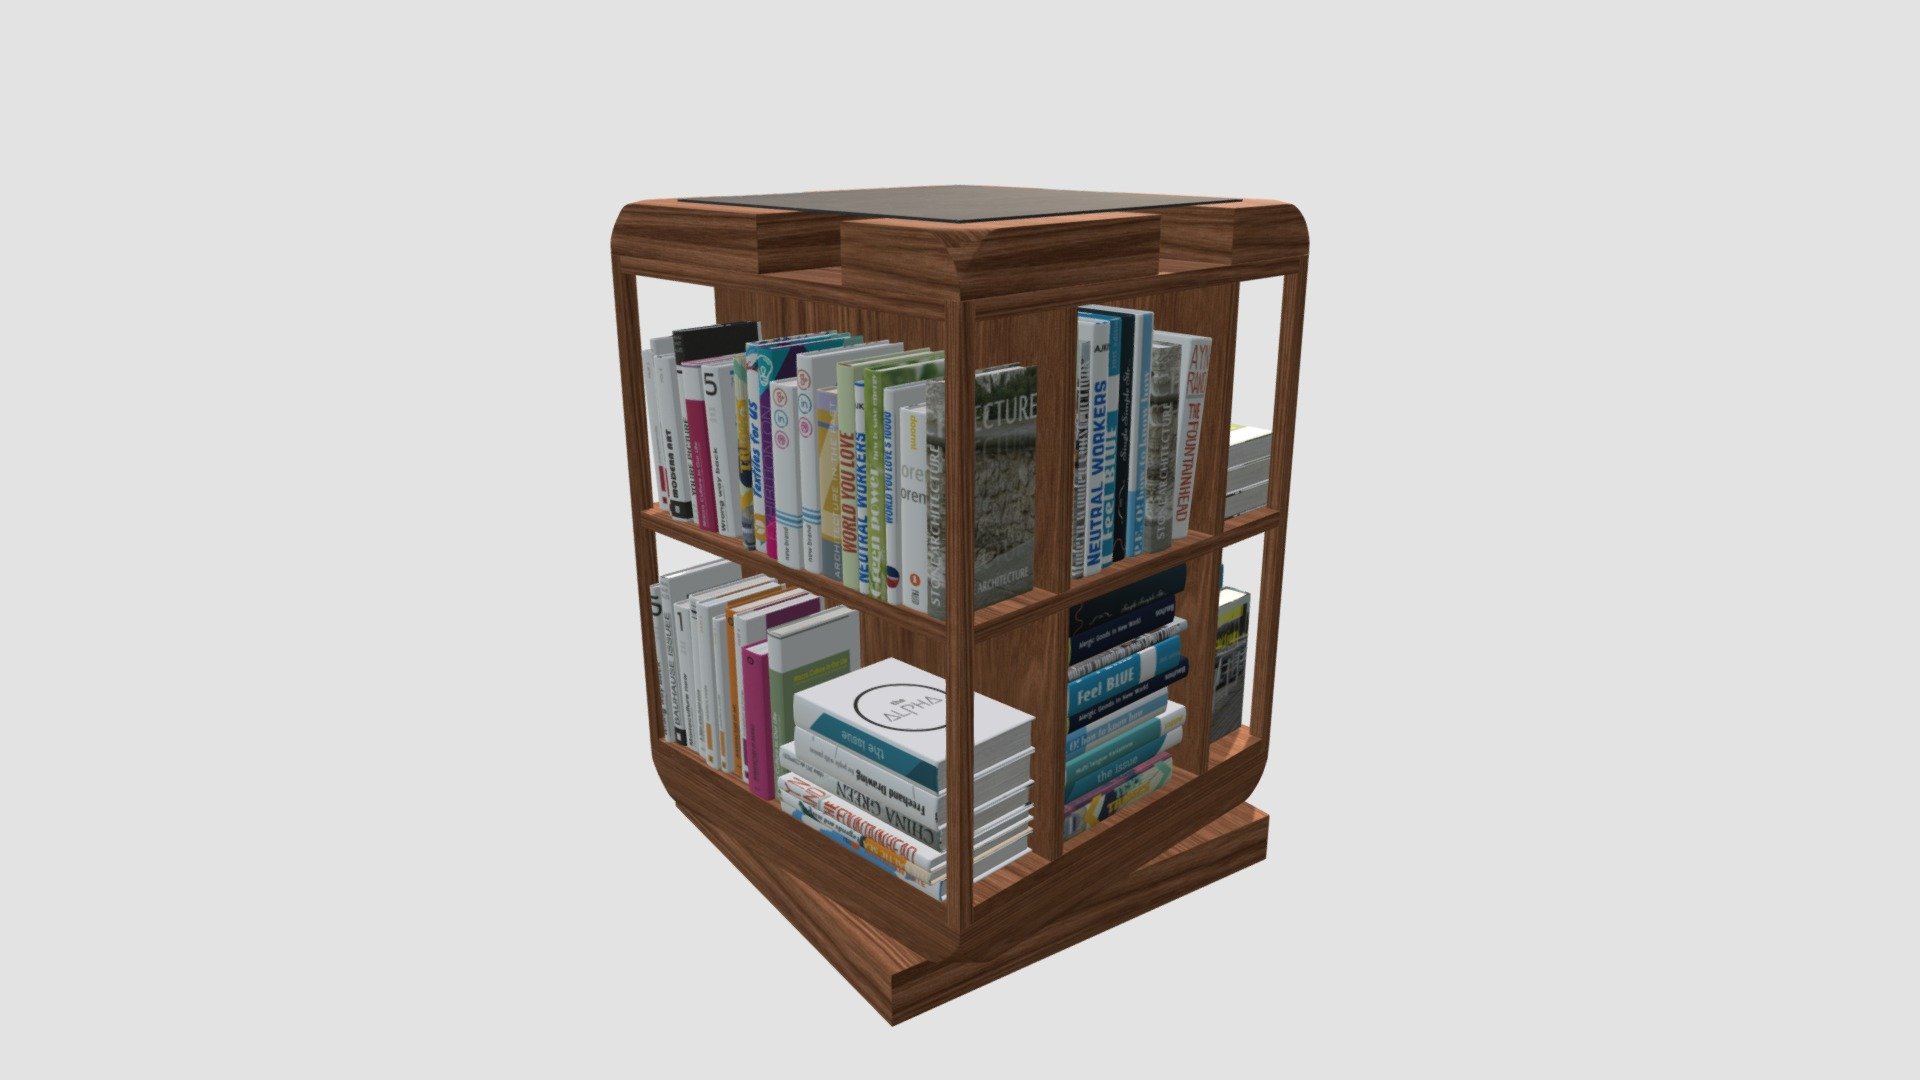 Highly detailed 3d model of bookshelf with all textures, shaders and materials. This 3d model is ready to use, just put it into your scene 3d model